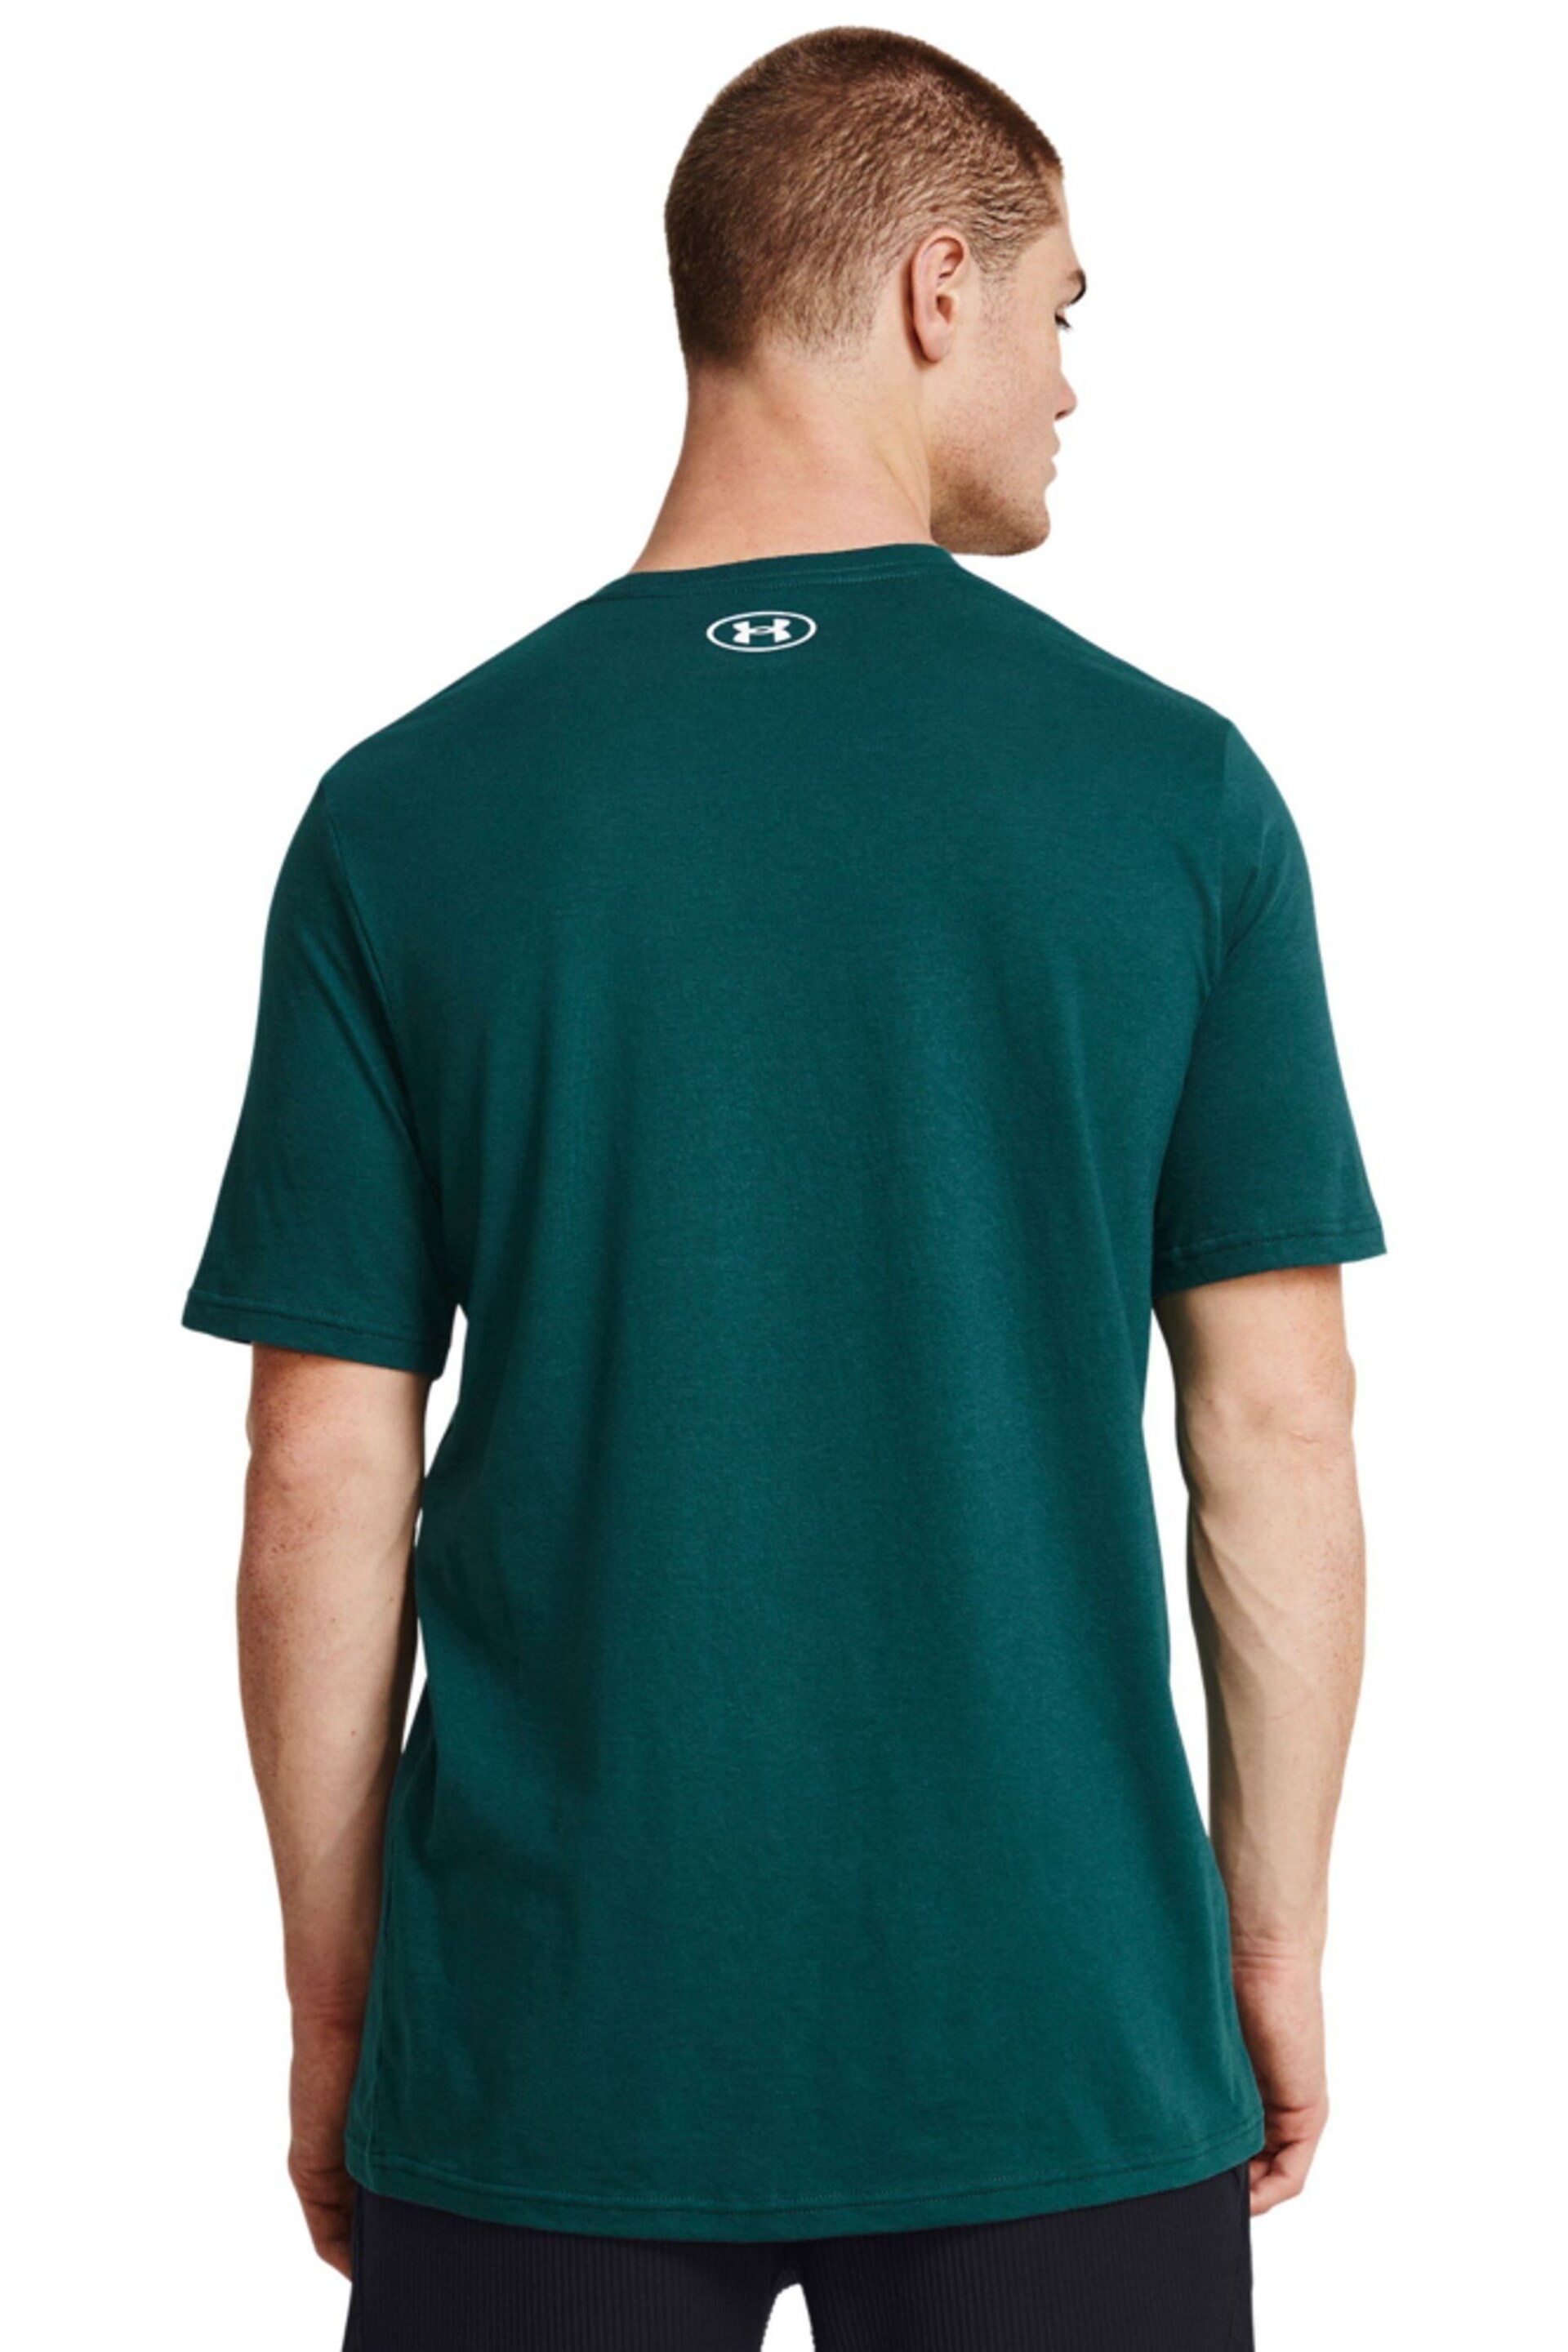 Under Armour Teal Blue Foundation Short Sleeve T-Shirt - Image 4 of 4